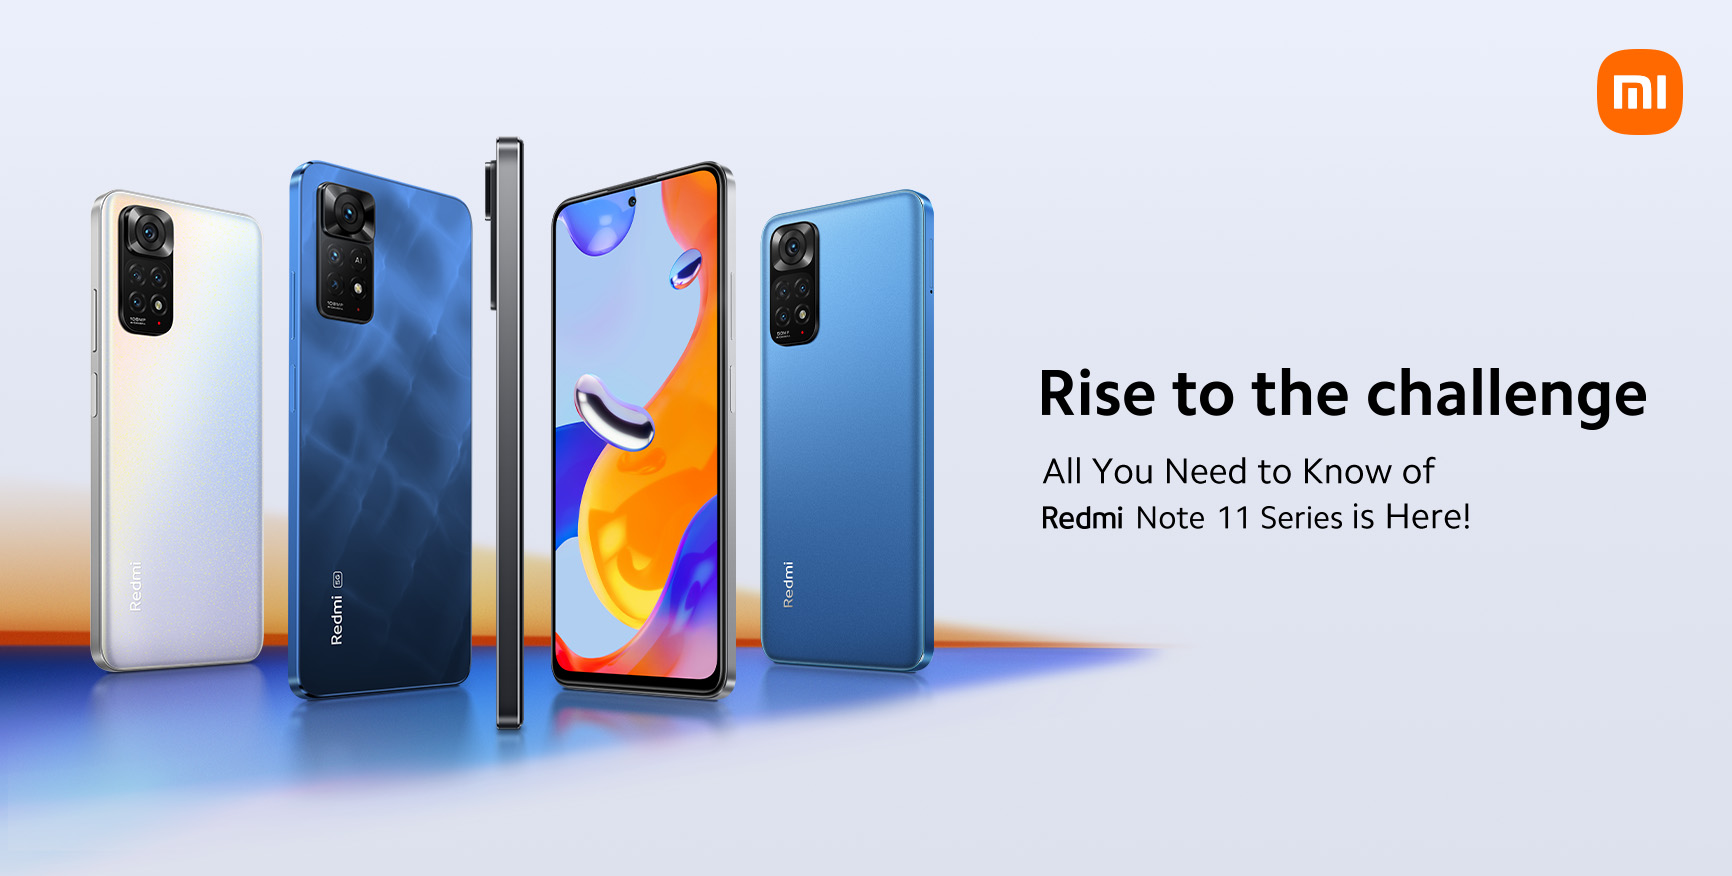 All You Need to Know of Redmi Note 11 Series is Here!